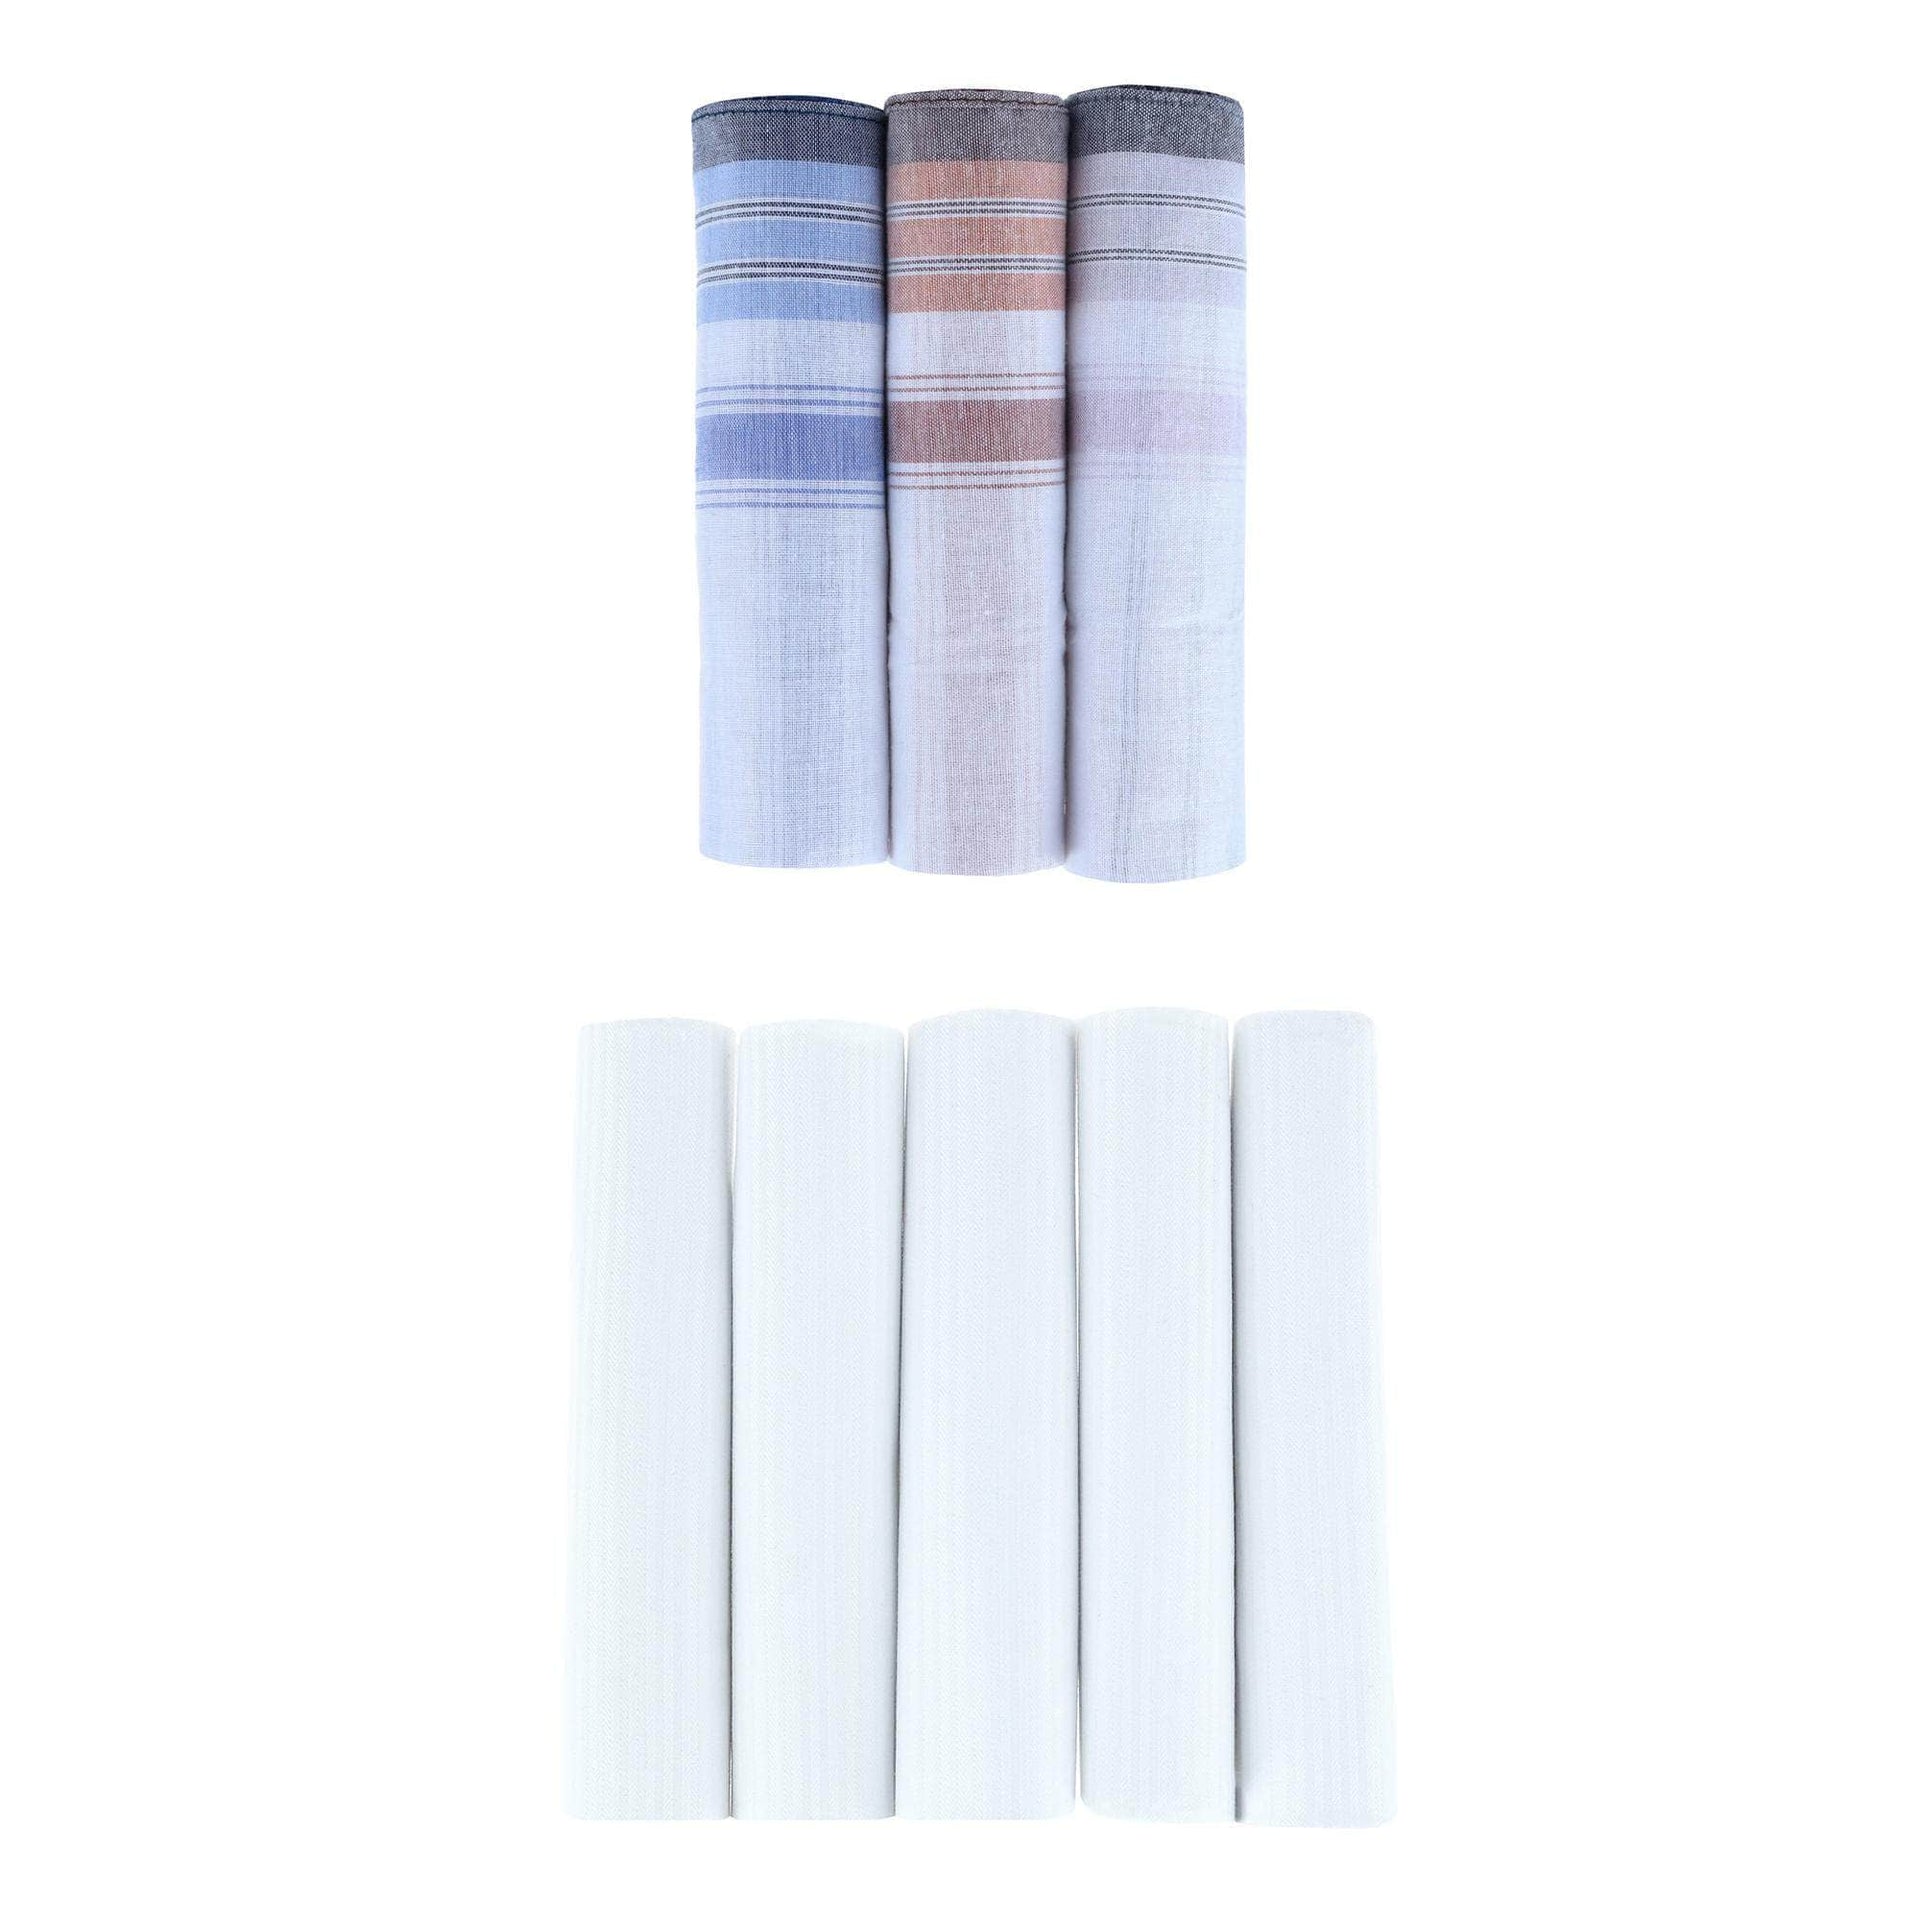 Premium 5 Pack and Checked 3 Pack Cotton Handkerchiefs Set